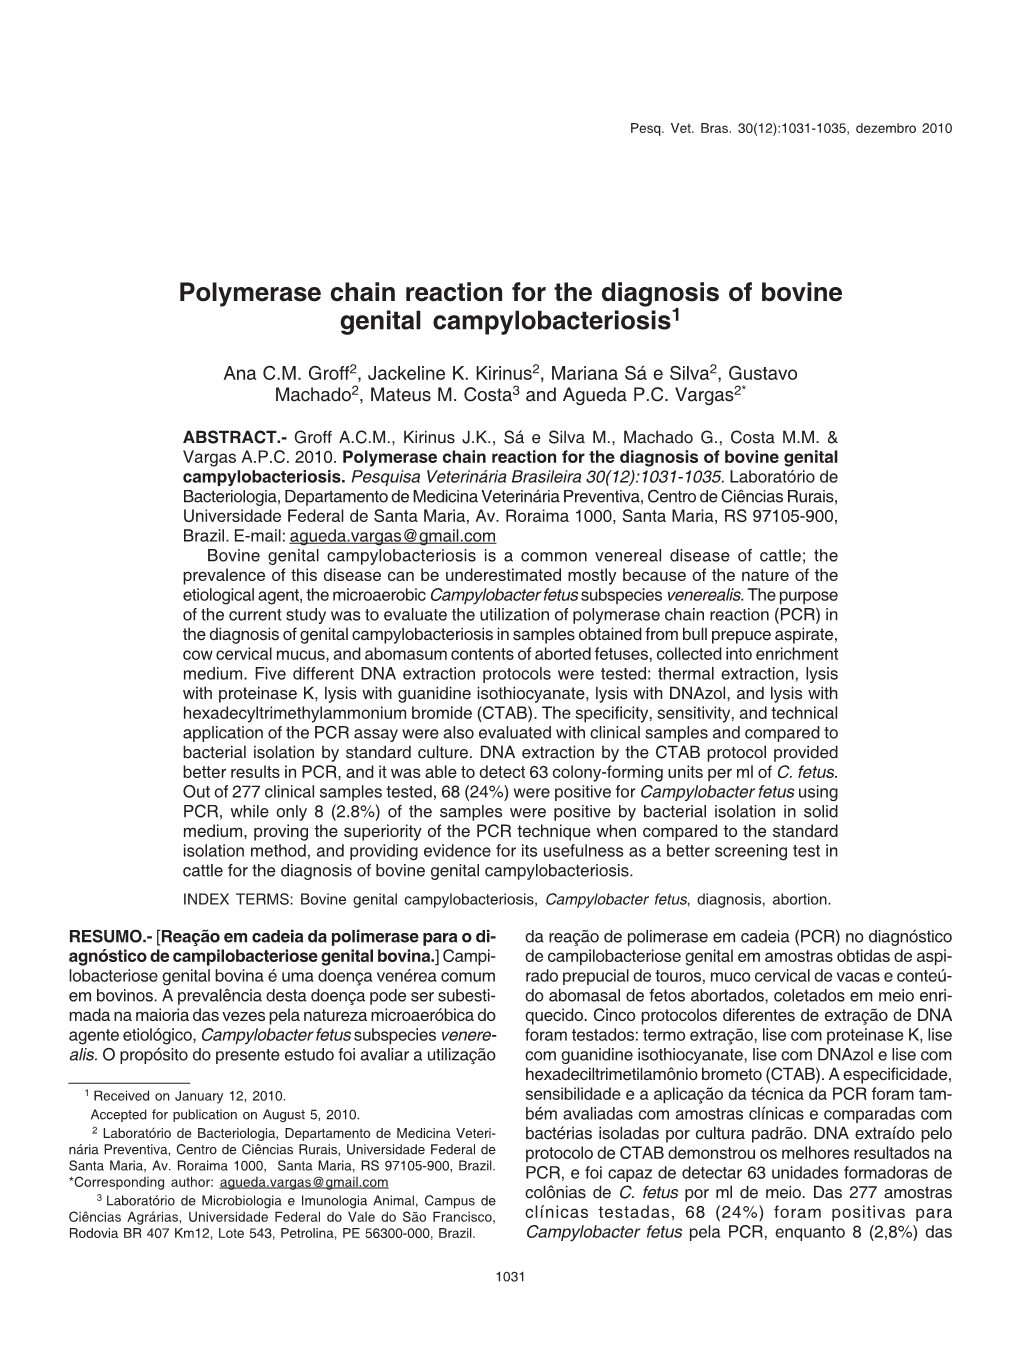 Polymerase Chain Reaction for the Diagnosis of Bovine Genital Campylobacteriosis1